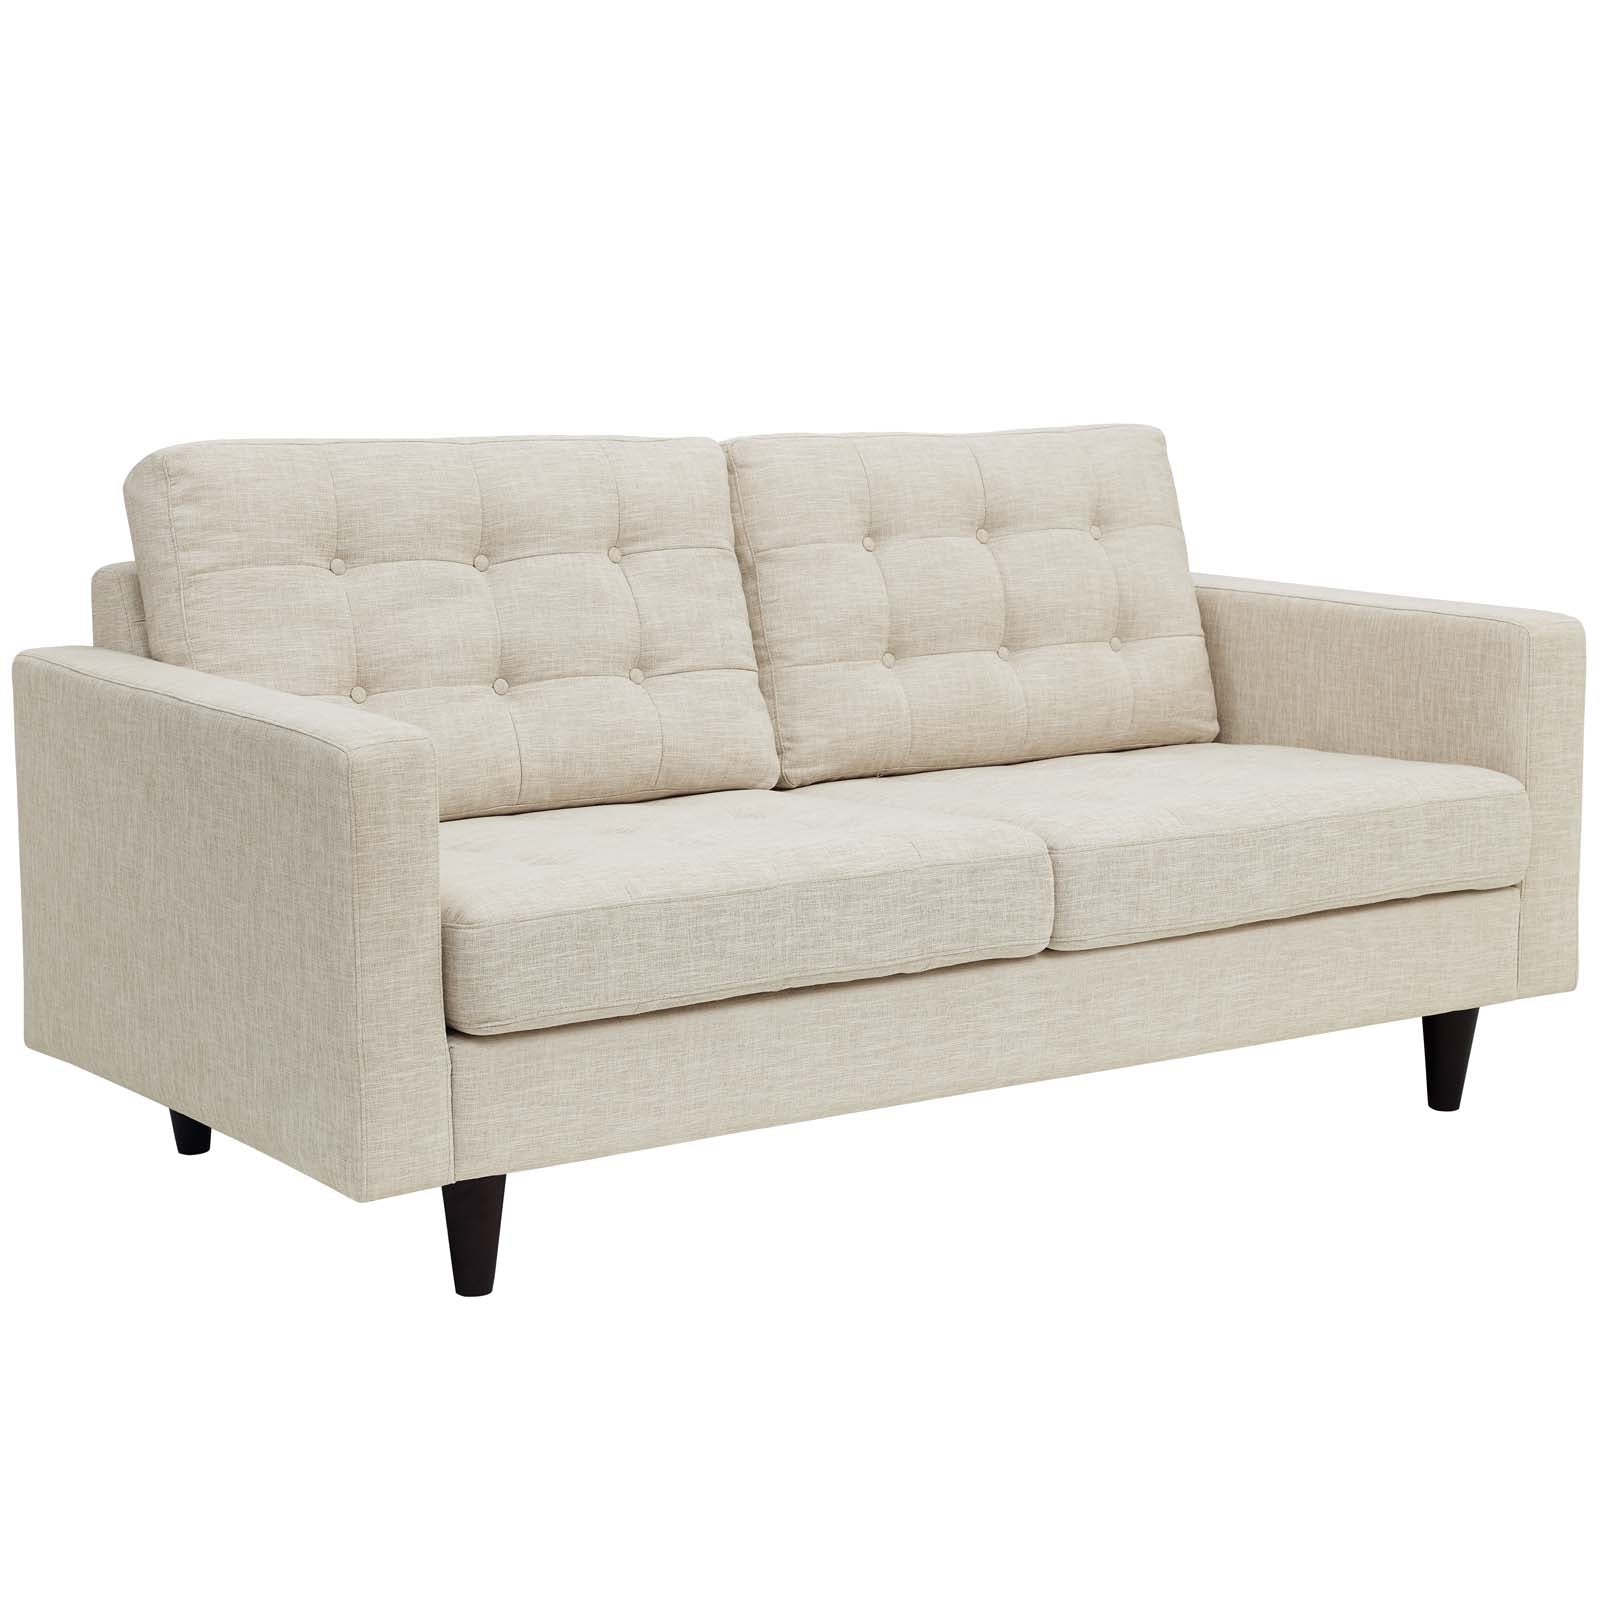 Modway Living Room Sets - Empress Sofa, Loveseat And Armchair Set Of 3 Beige